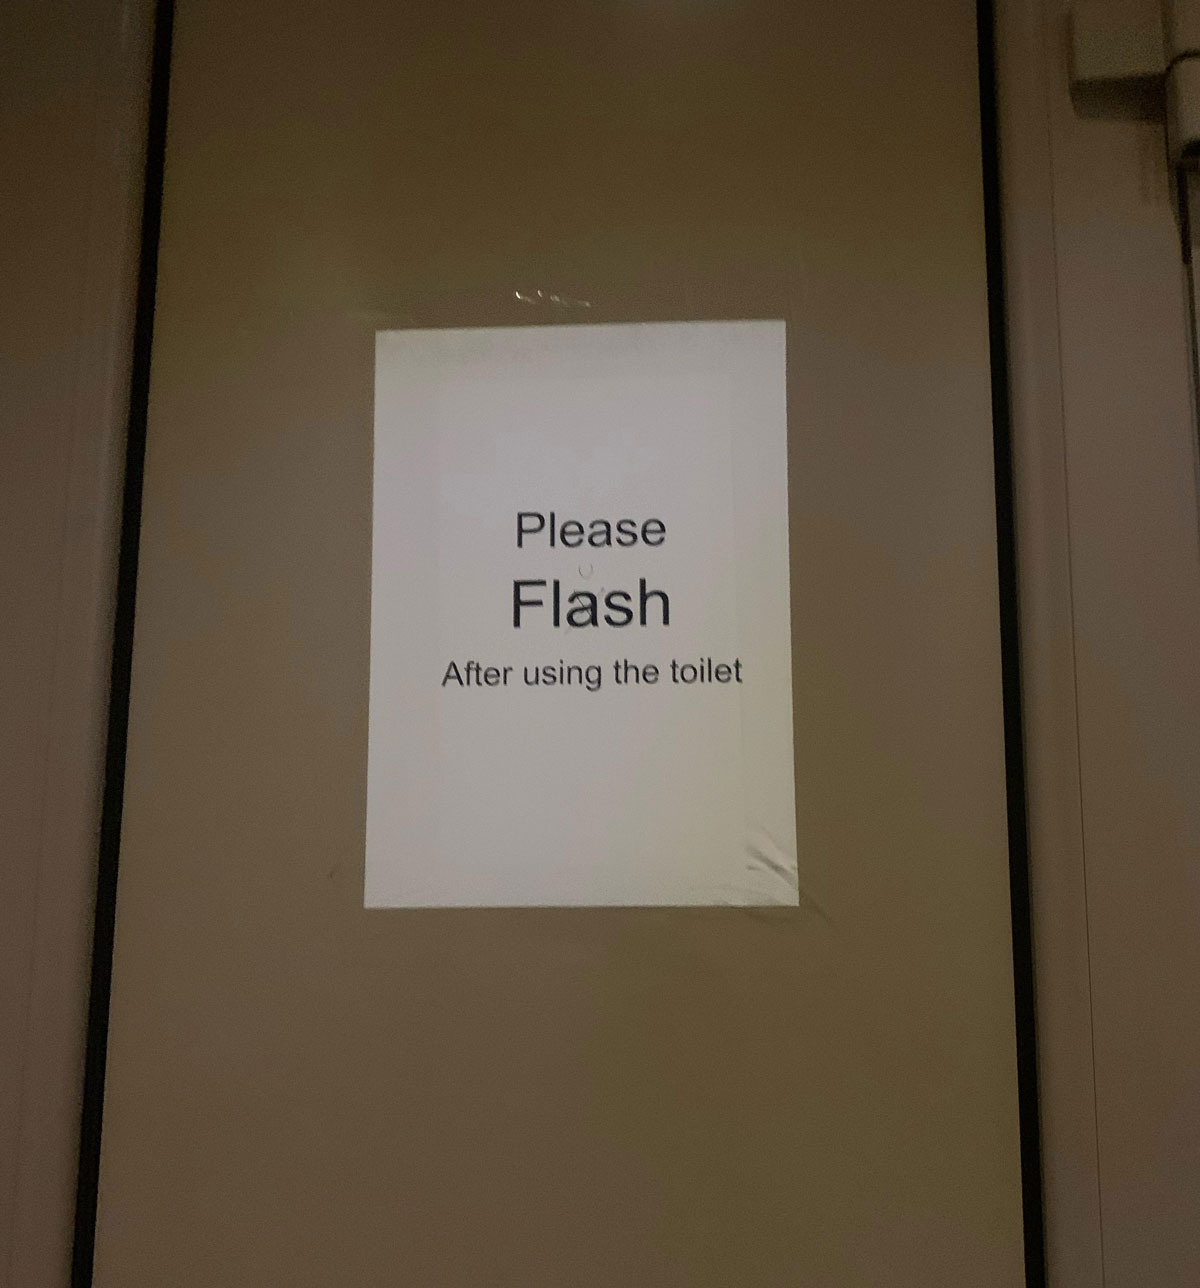 Don’t forget to flash